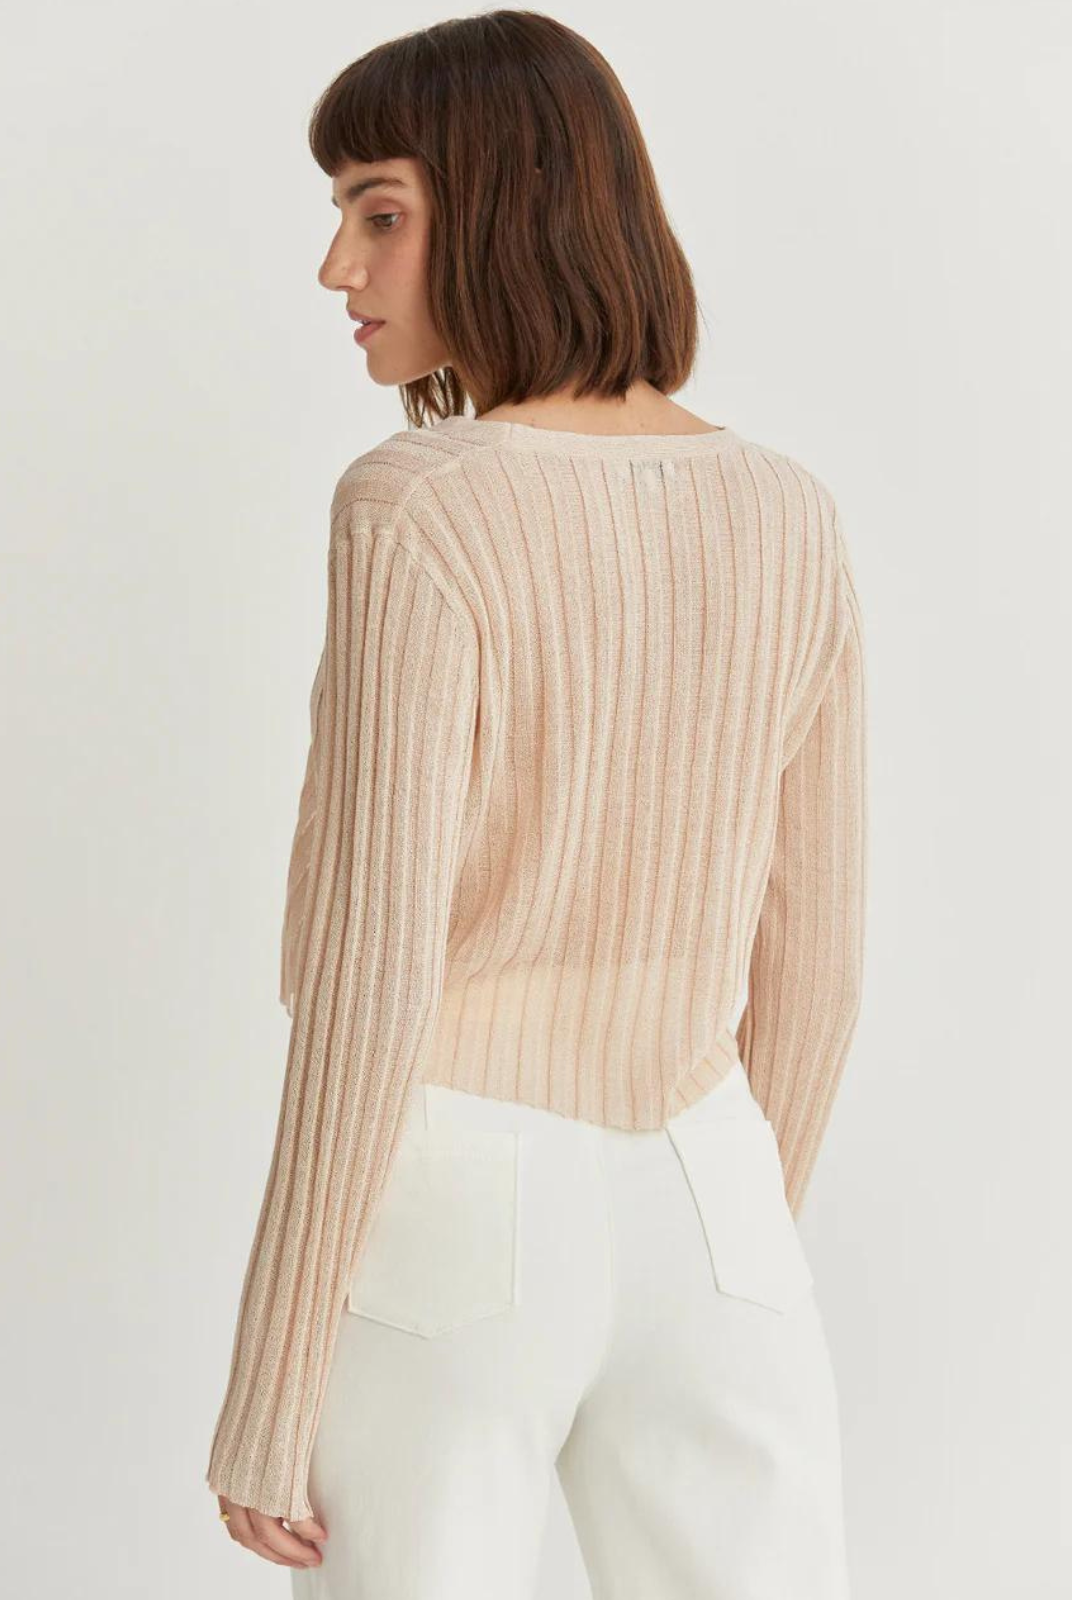 Leah Sheer Rib Cardigan. The Leah Sheer Rib Cardigan is a lightweight ribbed-knit cardigan featuring a V-neckline and long sleeves in a semi cropped length.